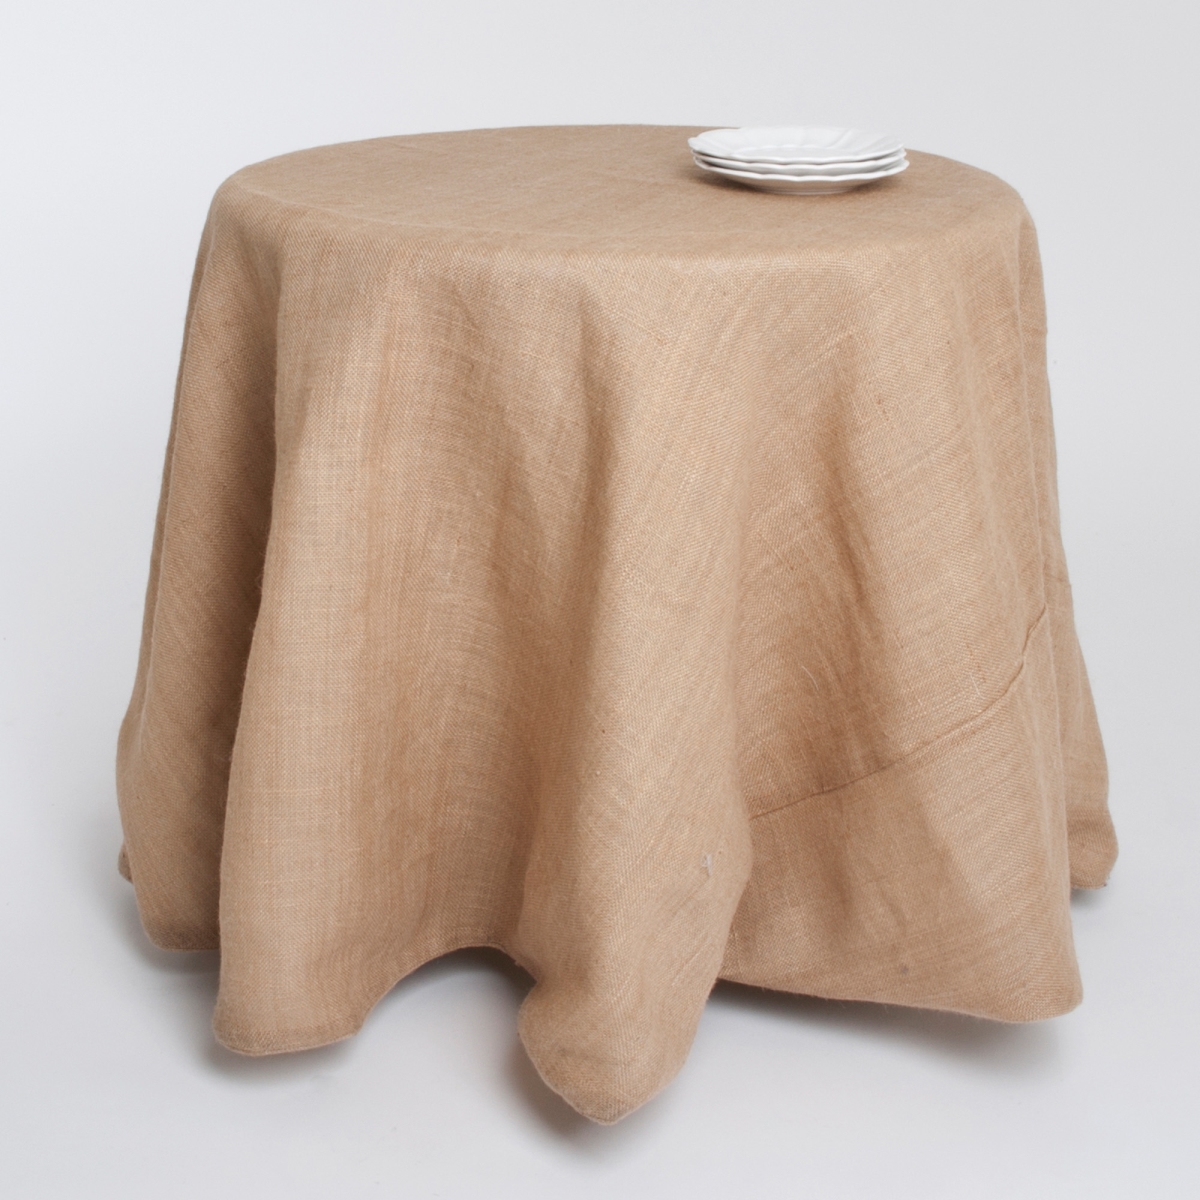 Picture of SARO 0811.N90R 90 in. Round Burlap Tablecloth - Natural